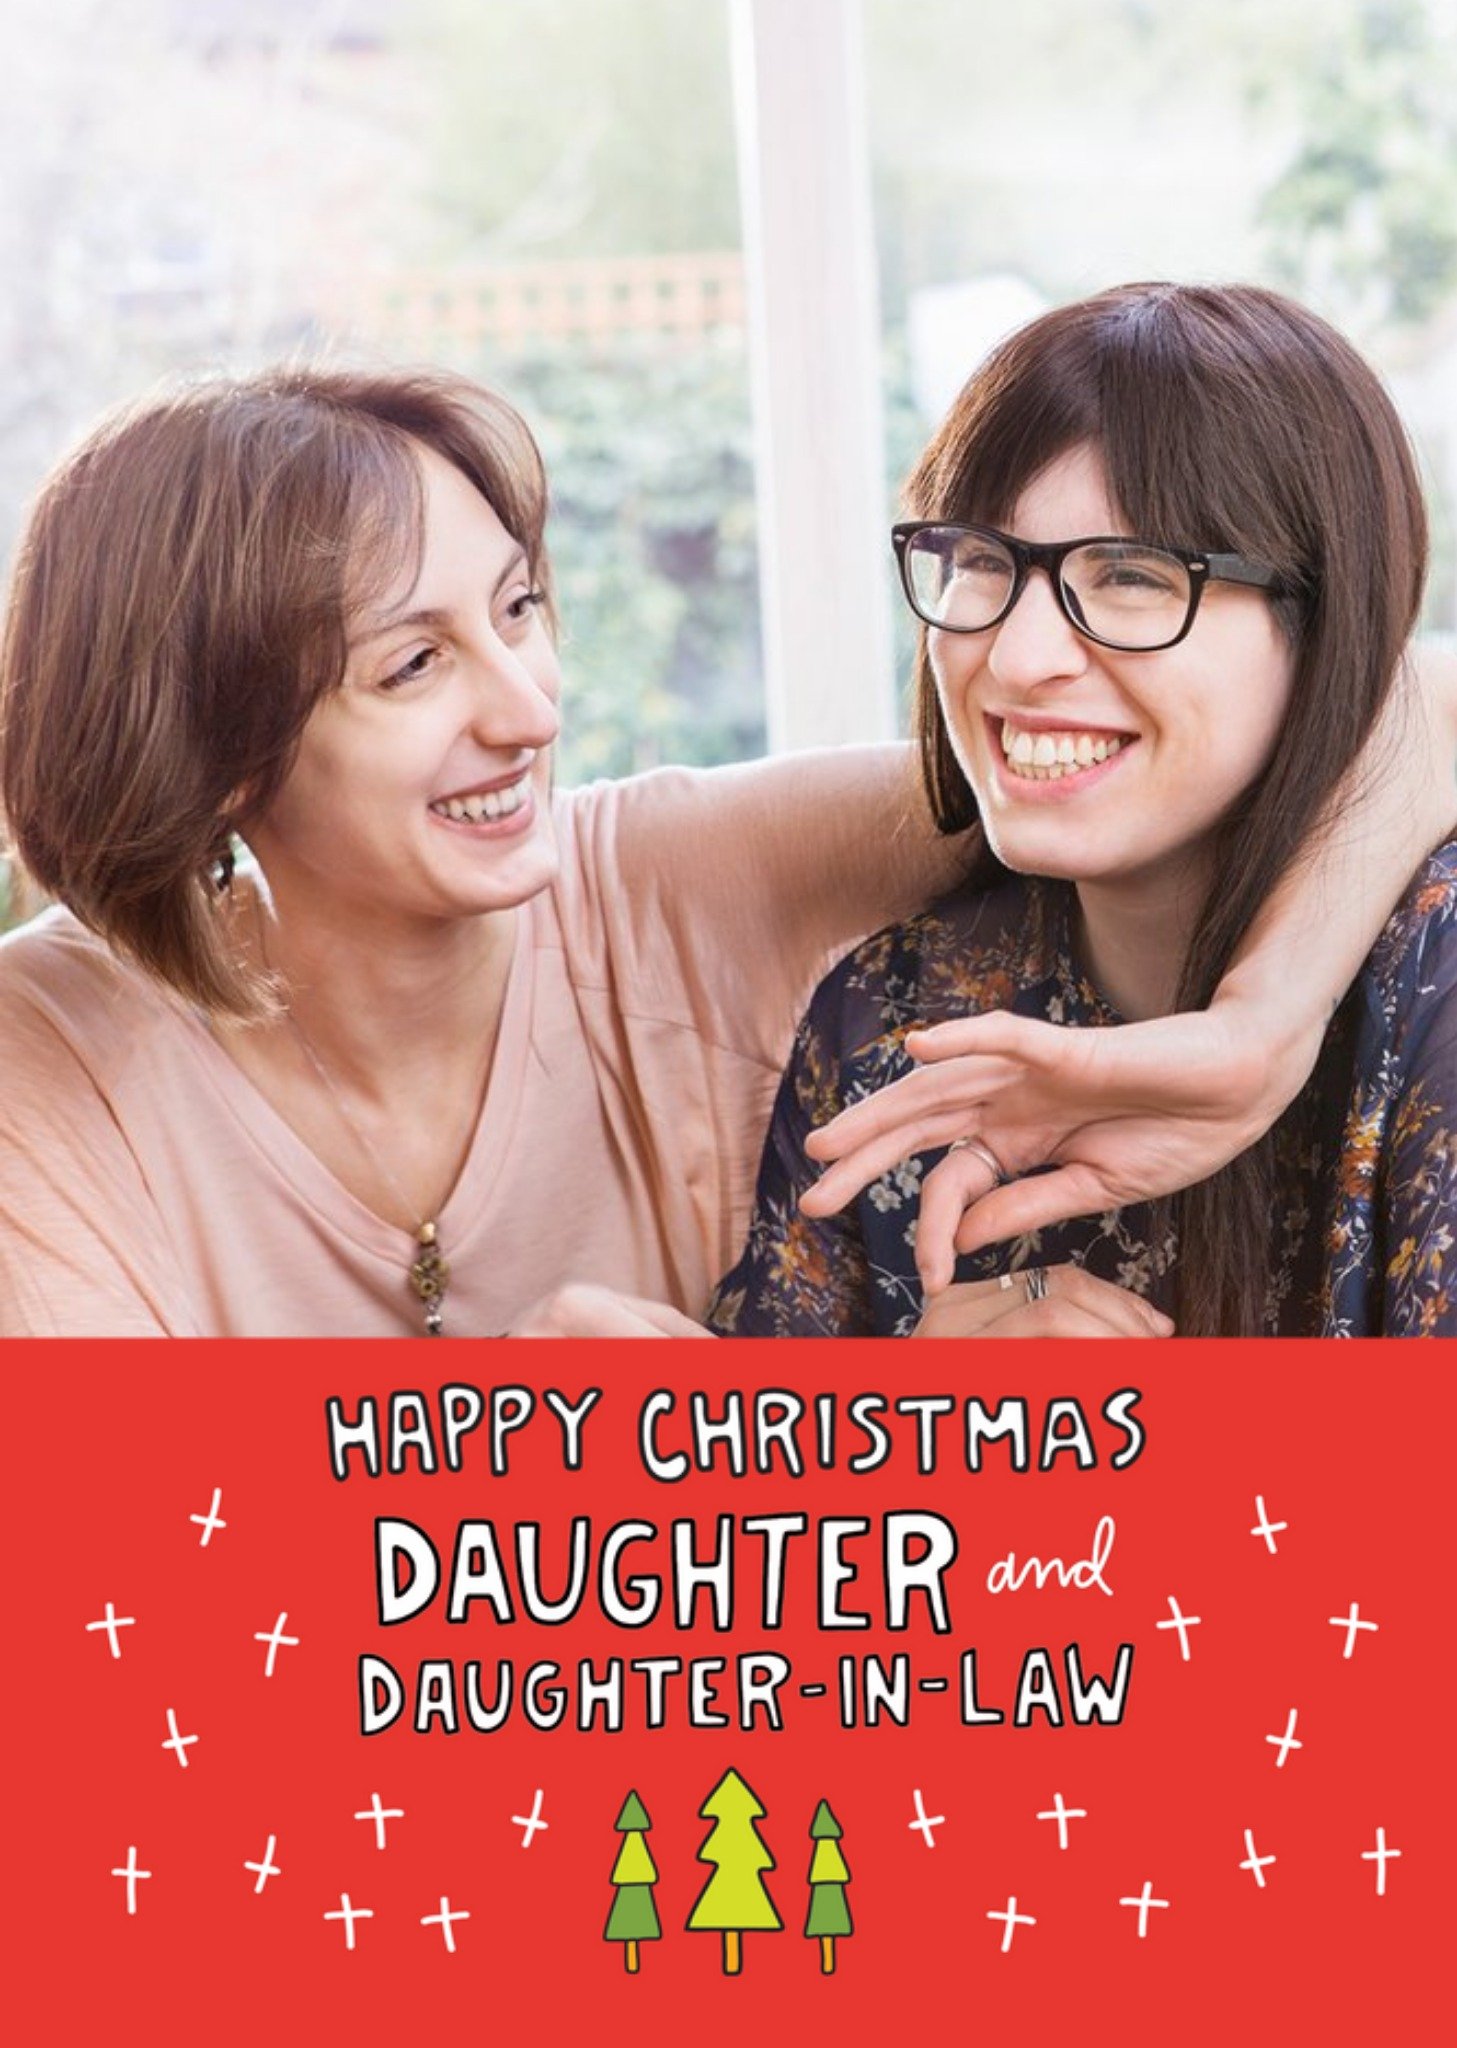 Moonpig Happy Christmas Daughter And Daughter In Law Photo Upload Card, Large